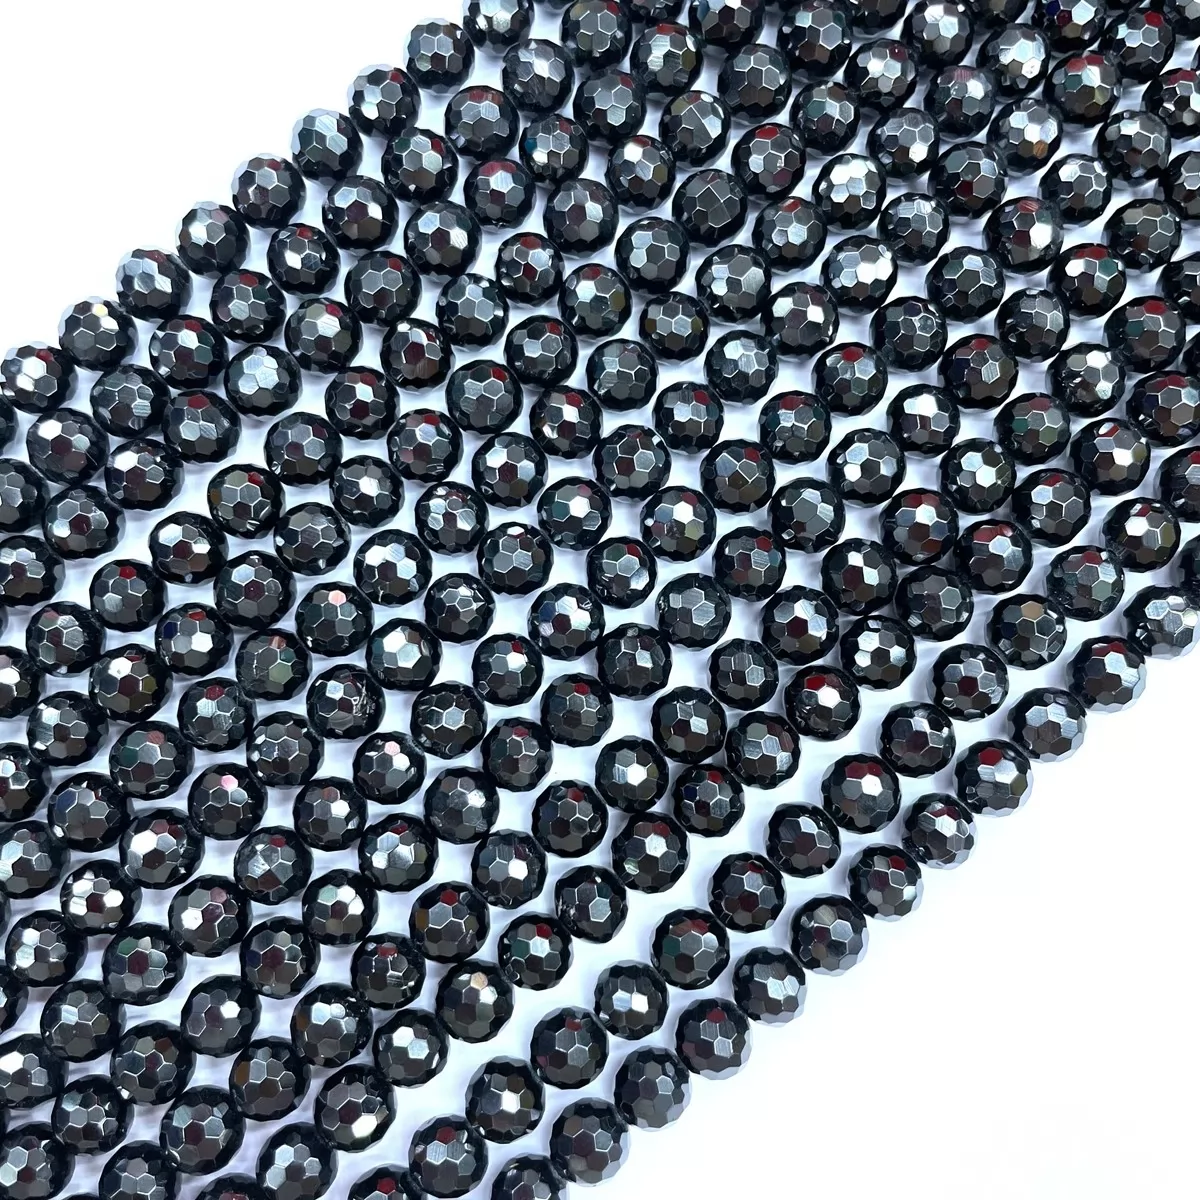 Black Spinel, Faceted Round,4-12mm, Approx 380mm